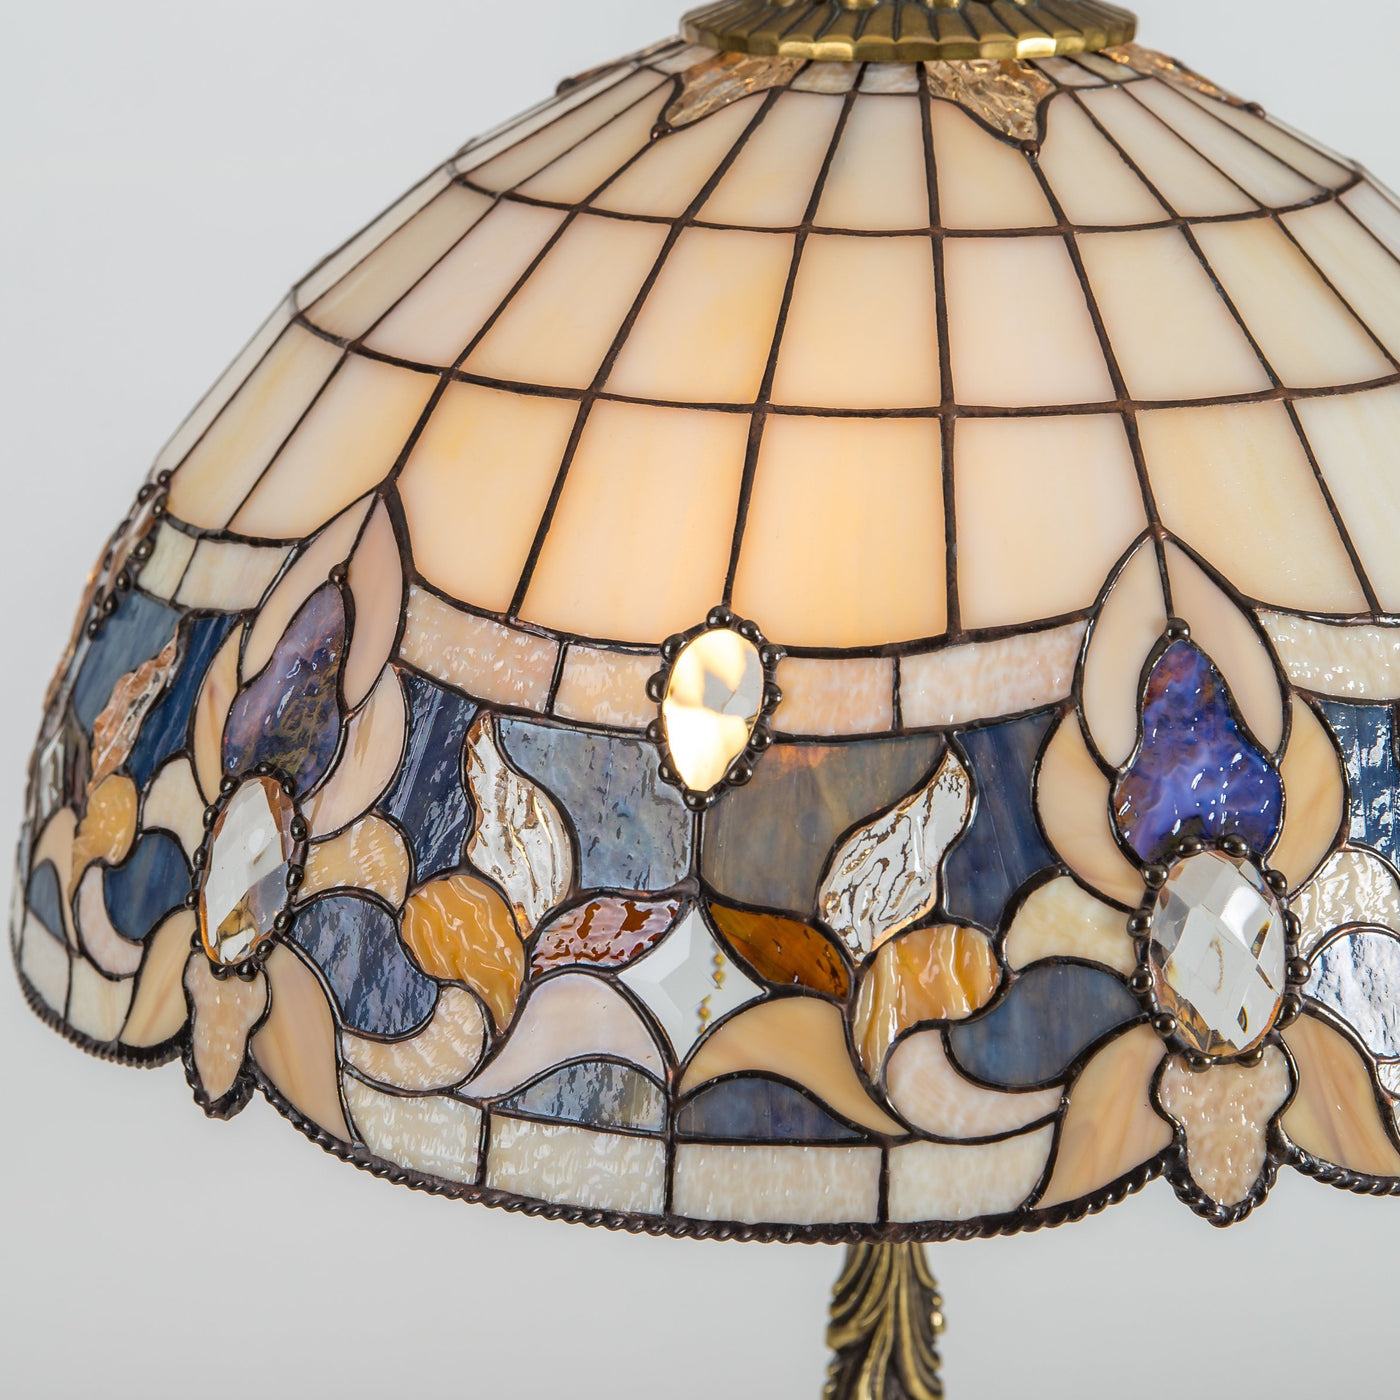 Zoomed stained glass lamp shade in beige with blue markings